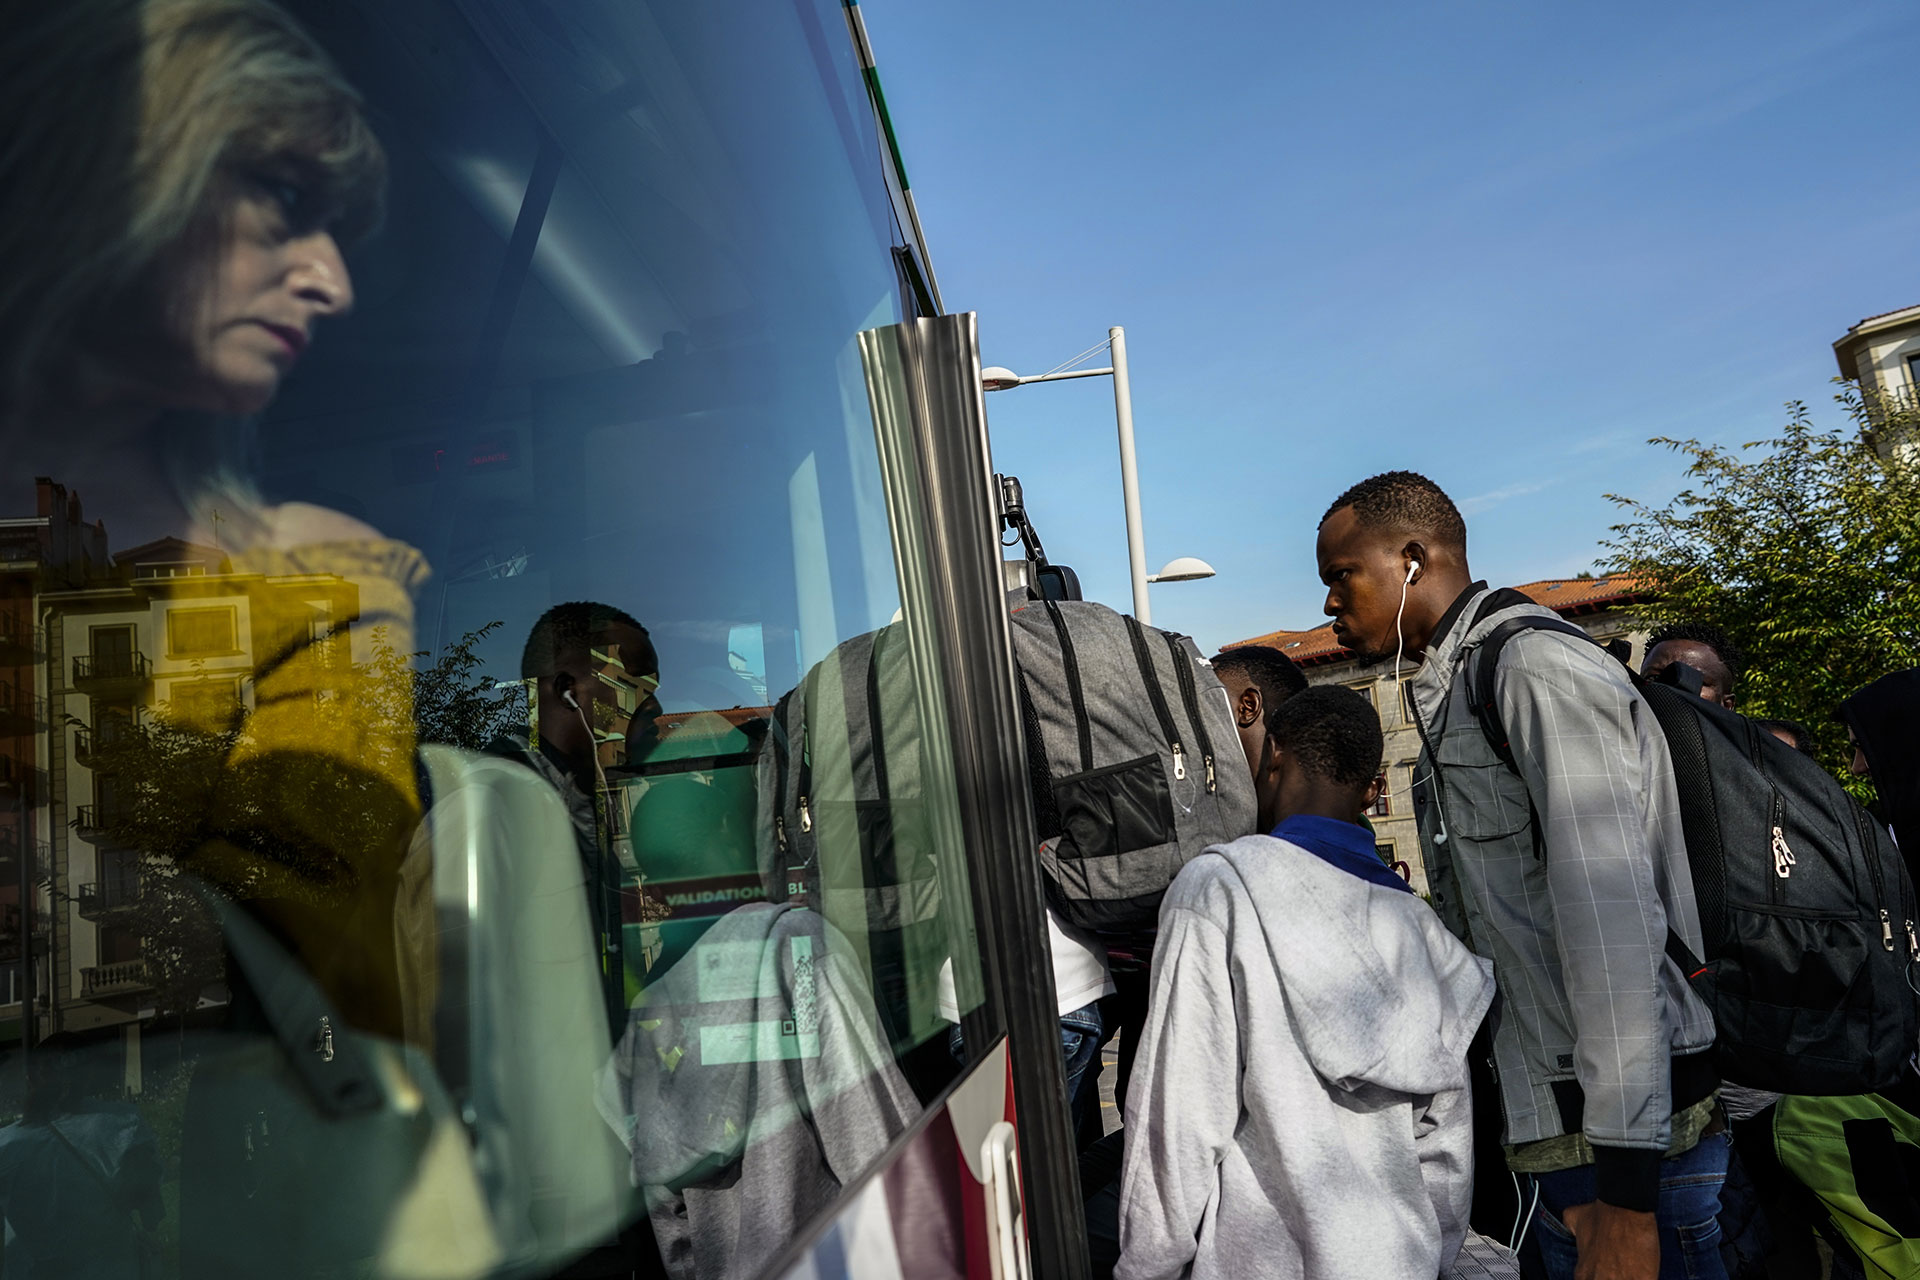 A group of young people board a bus in Irún to try to cross the border and reach France, September 14, 2019.